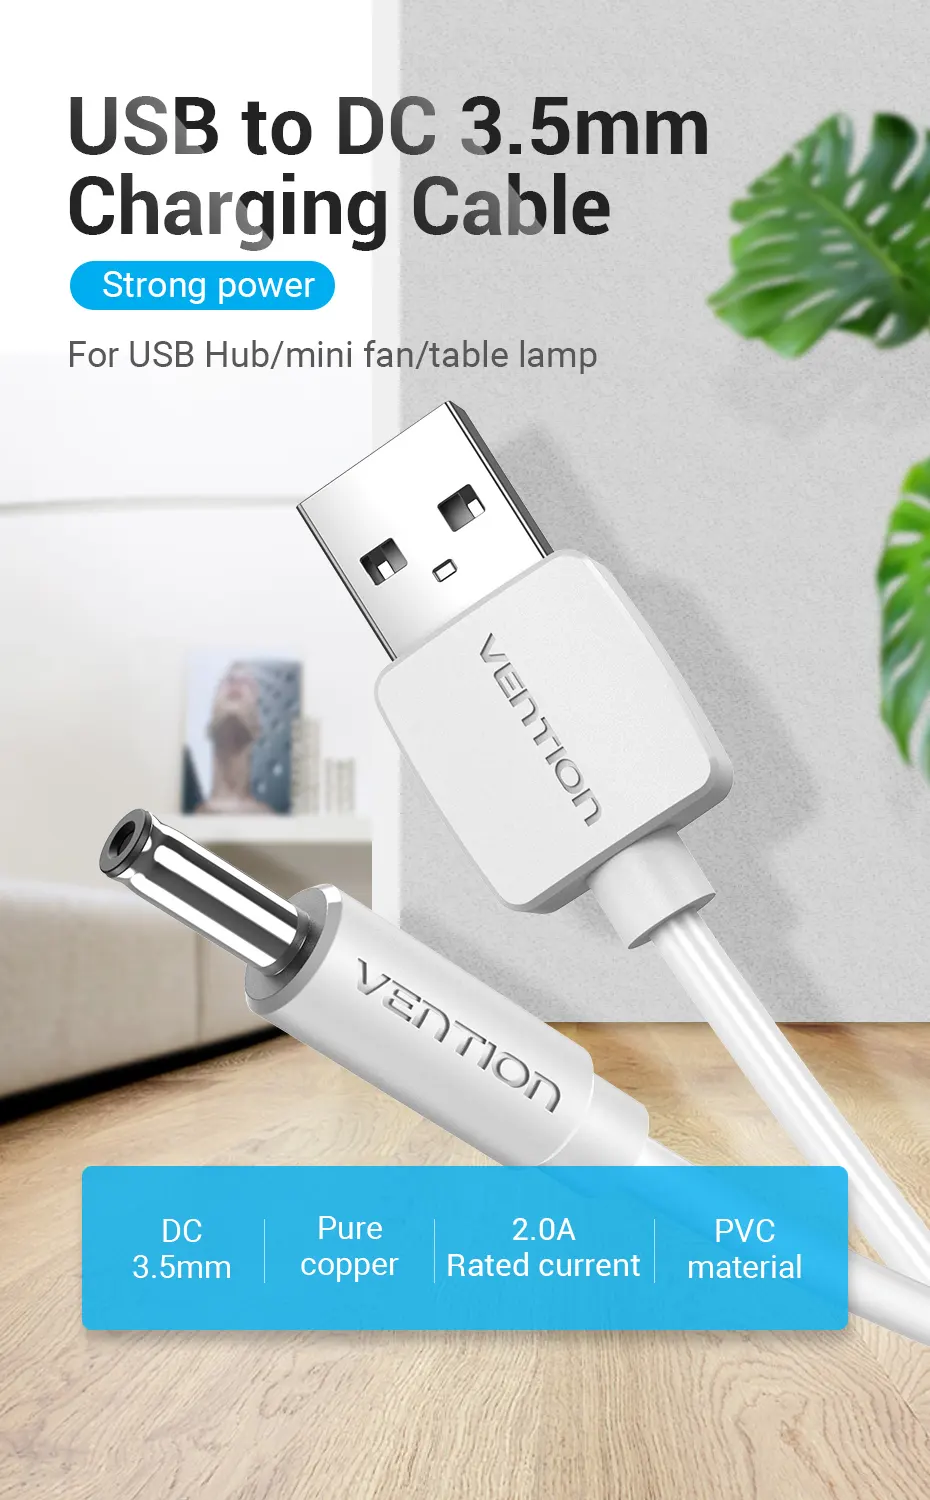 VENTION USB to DC 3.5mm Charging Cable